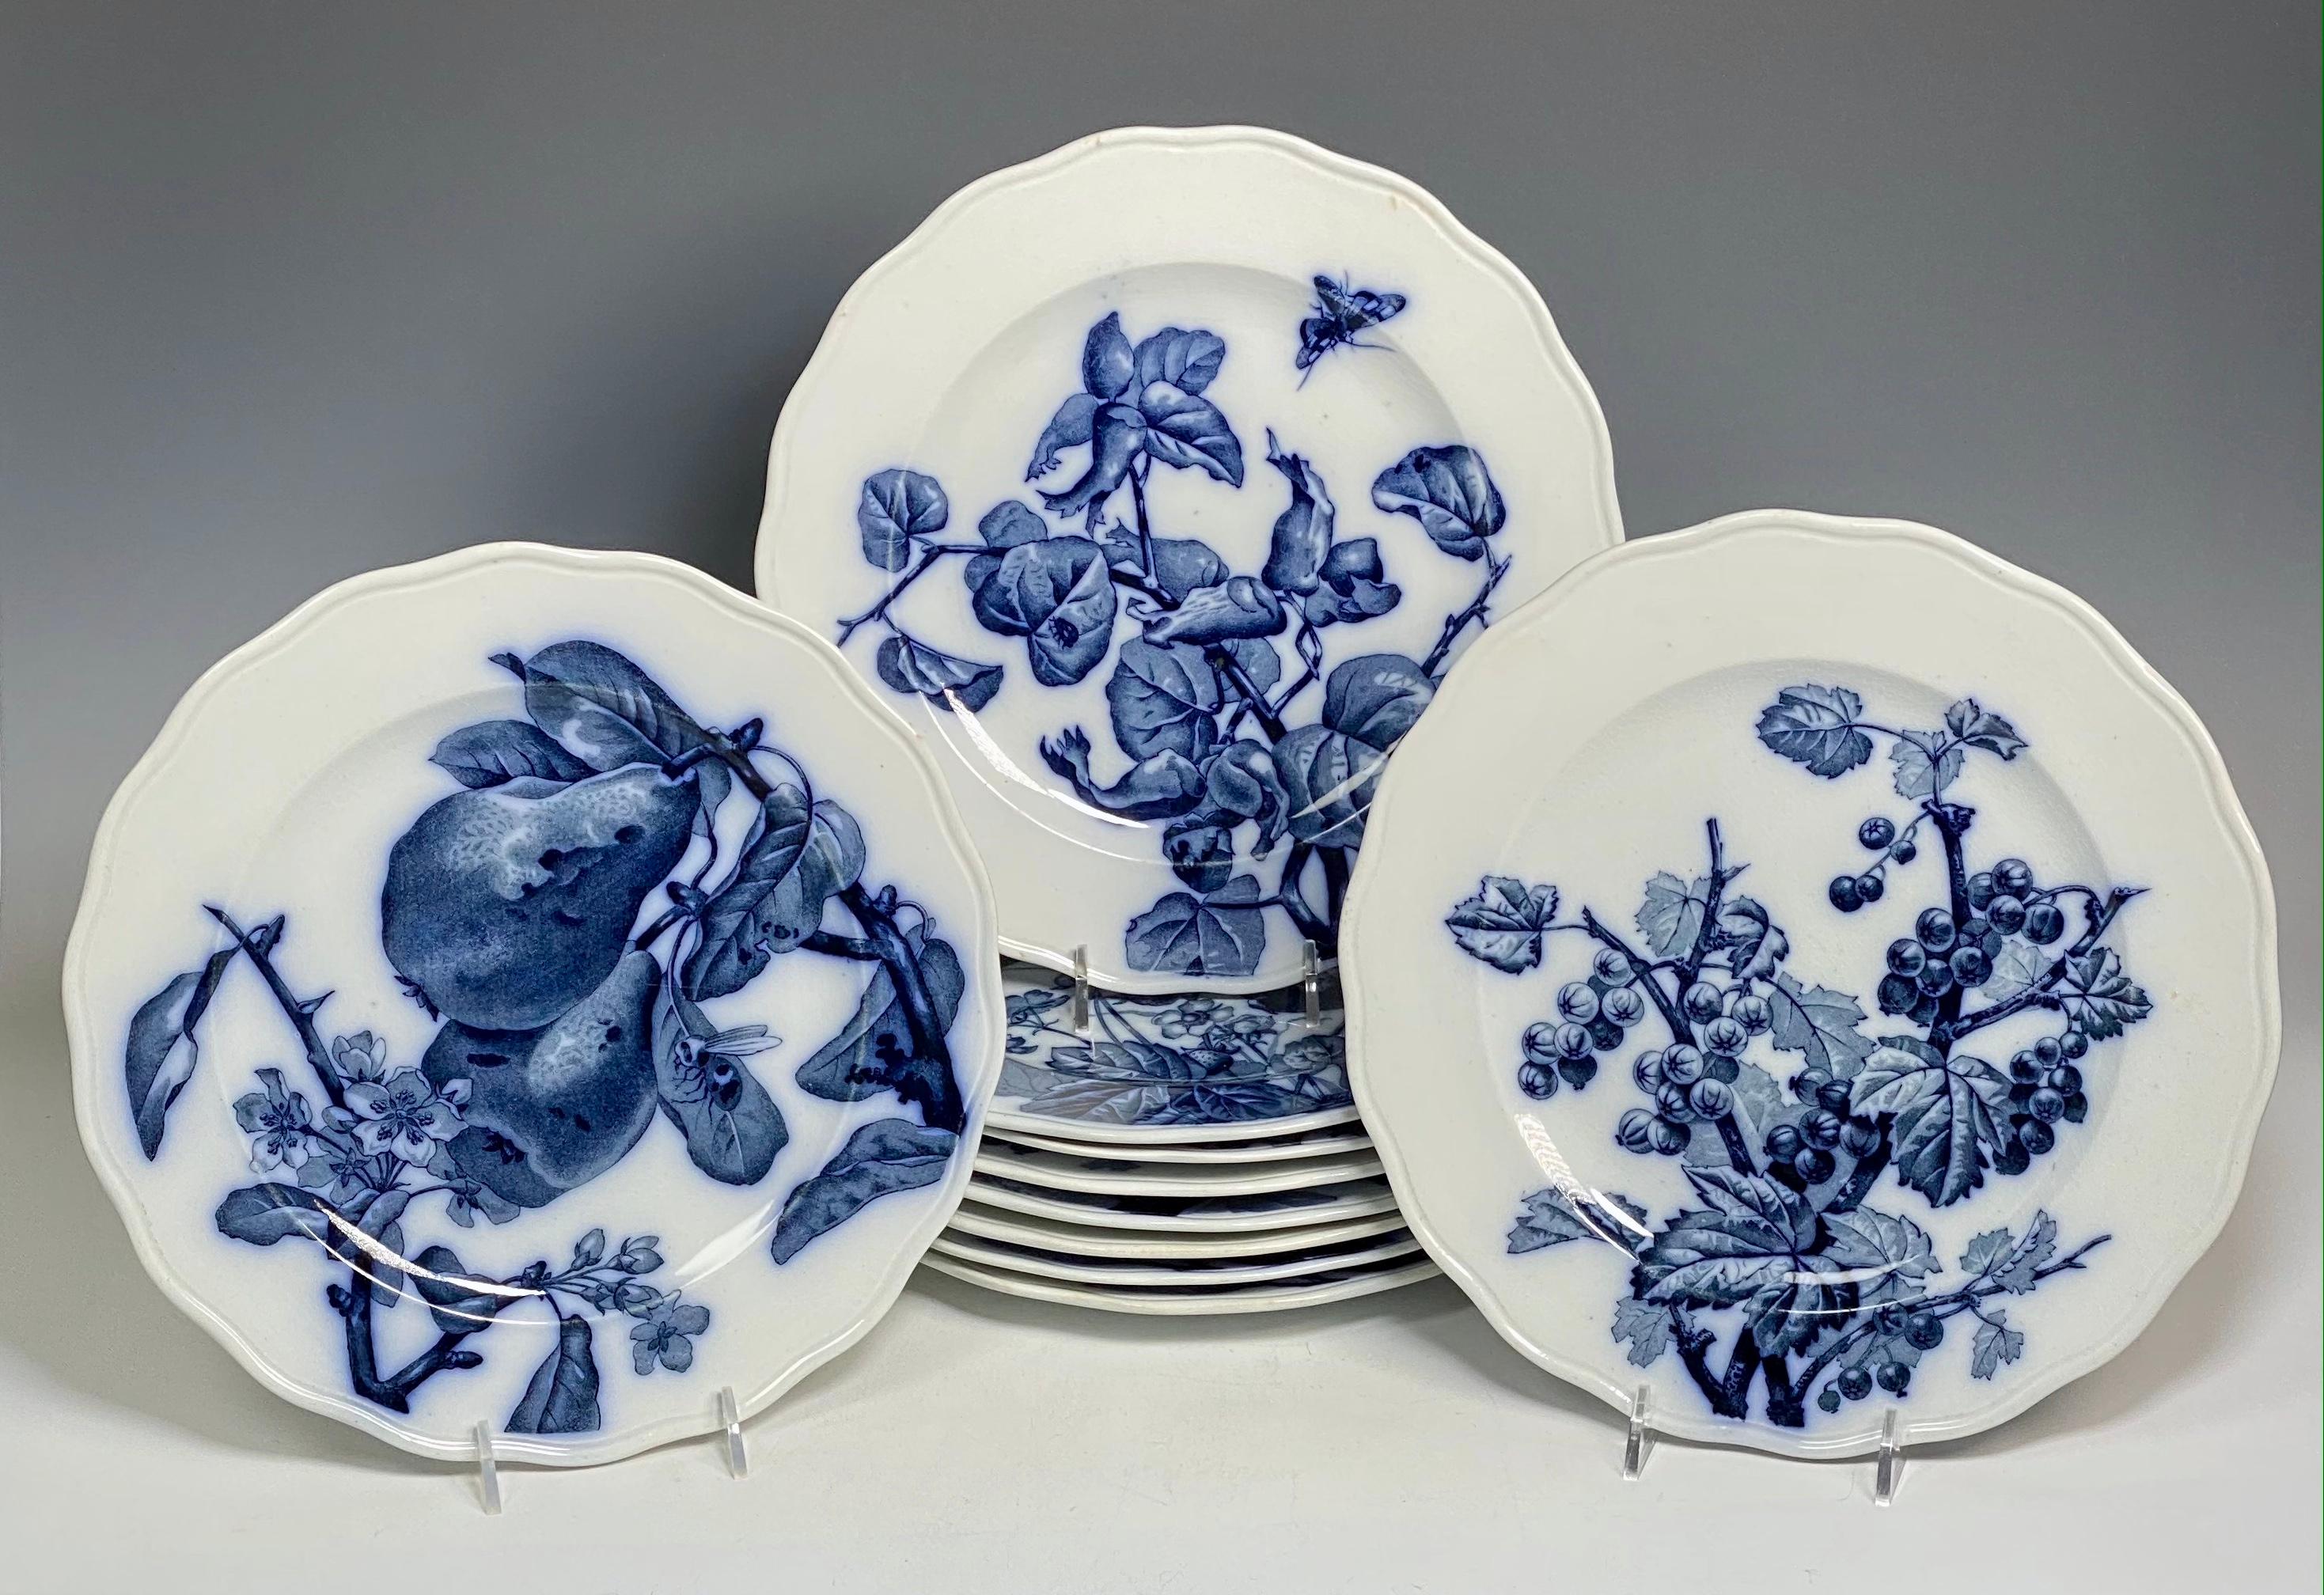 Classic 19th C. Aesthetic Movement decoration is featured on this set of 12 indigo blue unusual plates featuring different fruit subjects. They offer realistically depicted fruits in the Aesthetic taste and they are the 